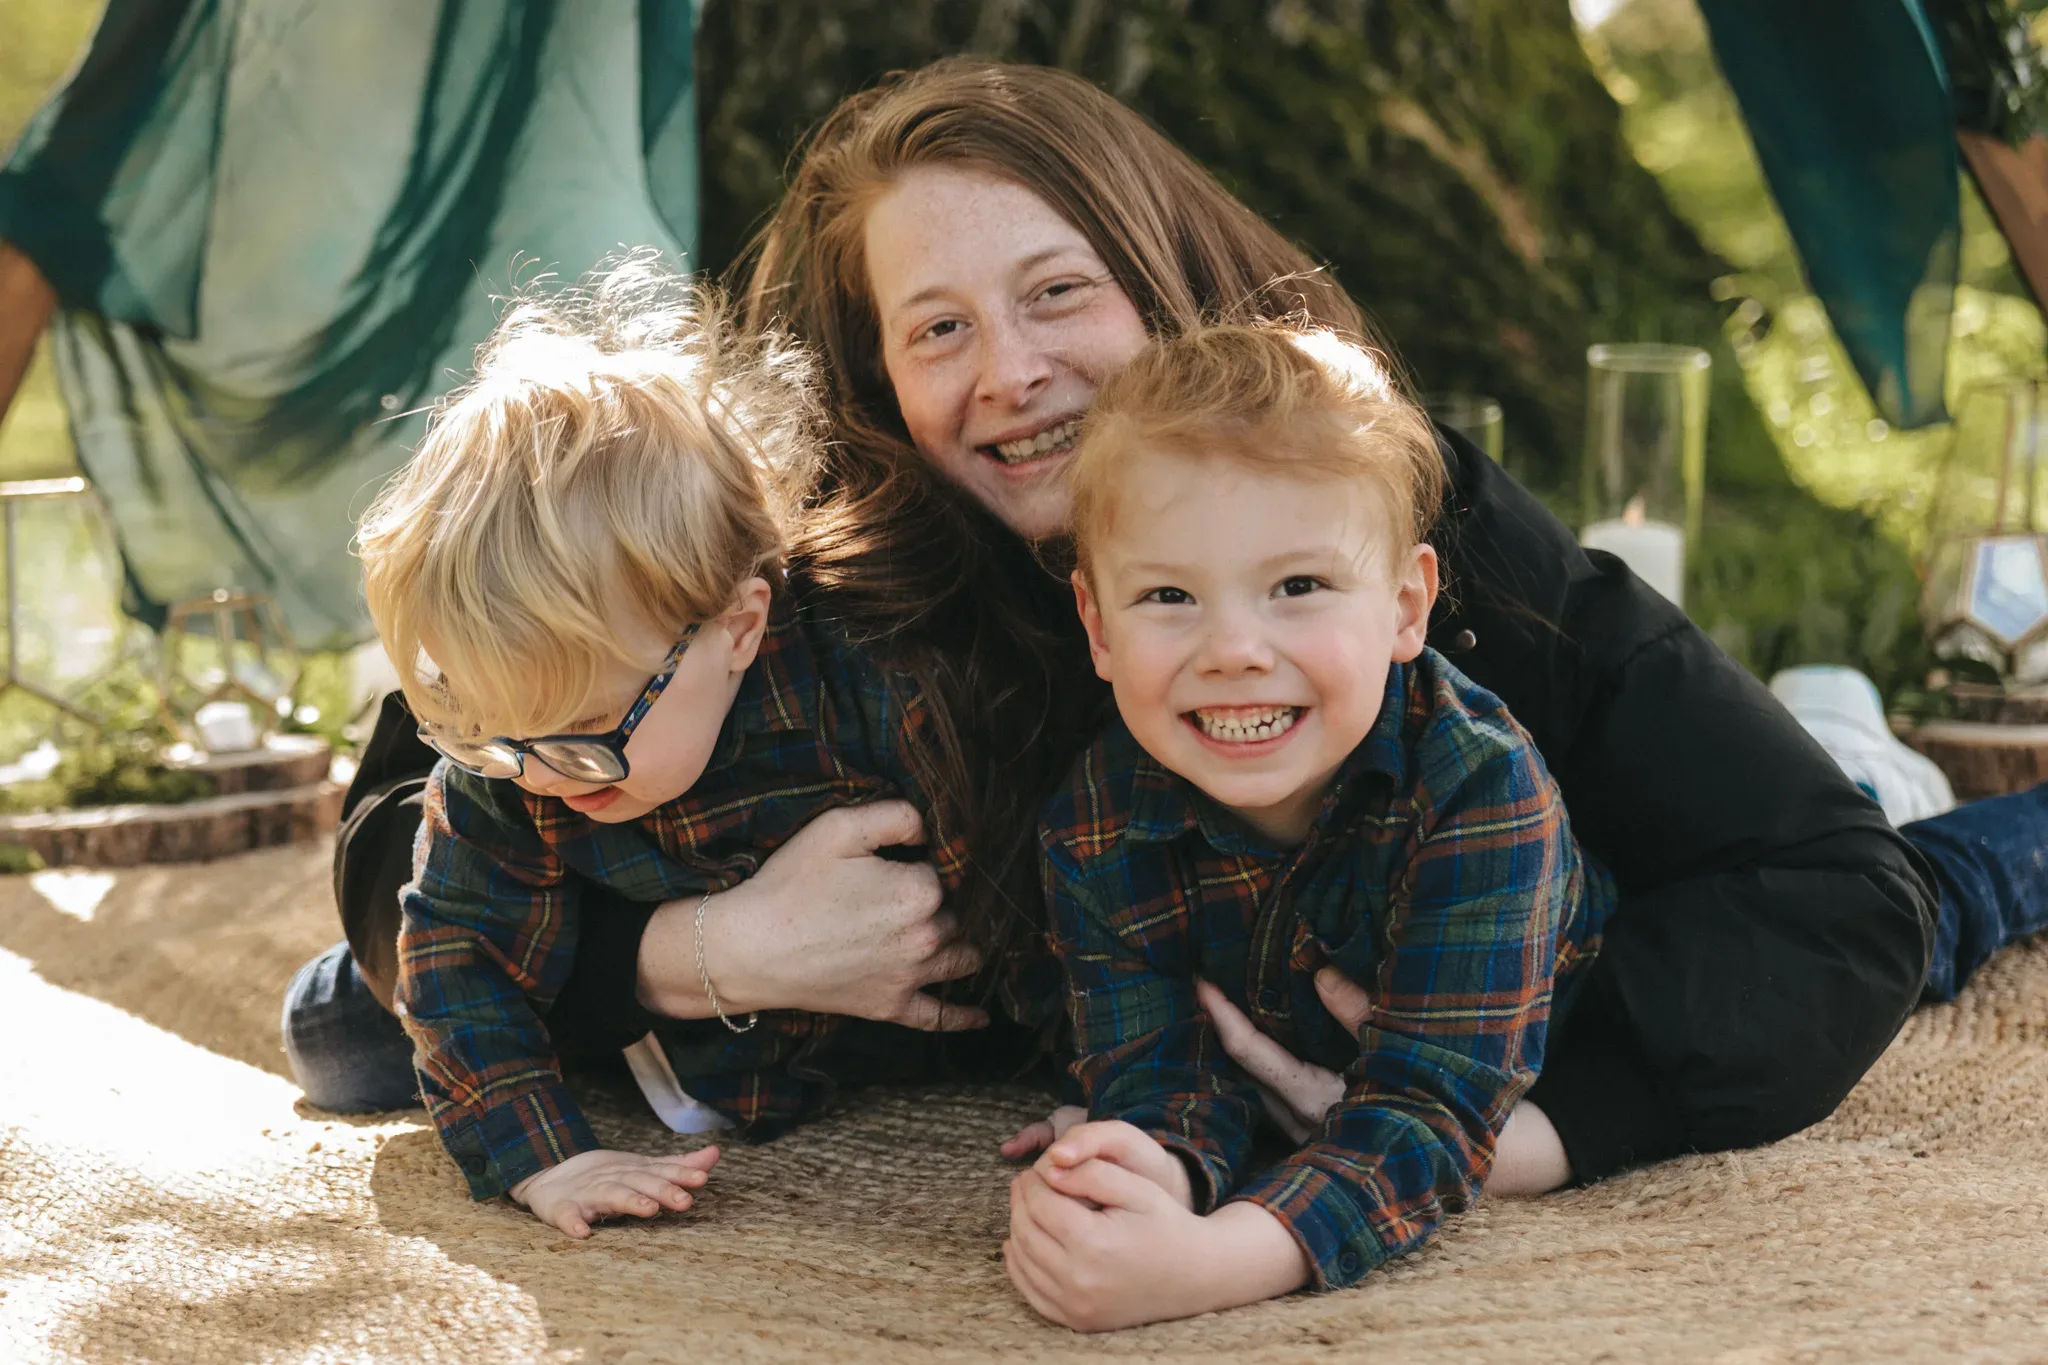 A joyful woman lies on a blanket with her two young sons, all wearing plaid shirts and smiling warmly in a sunlit garden setting with greenery in the background.